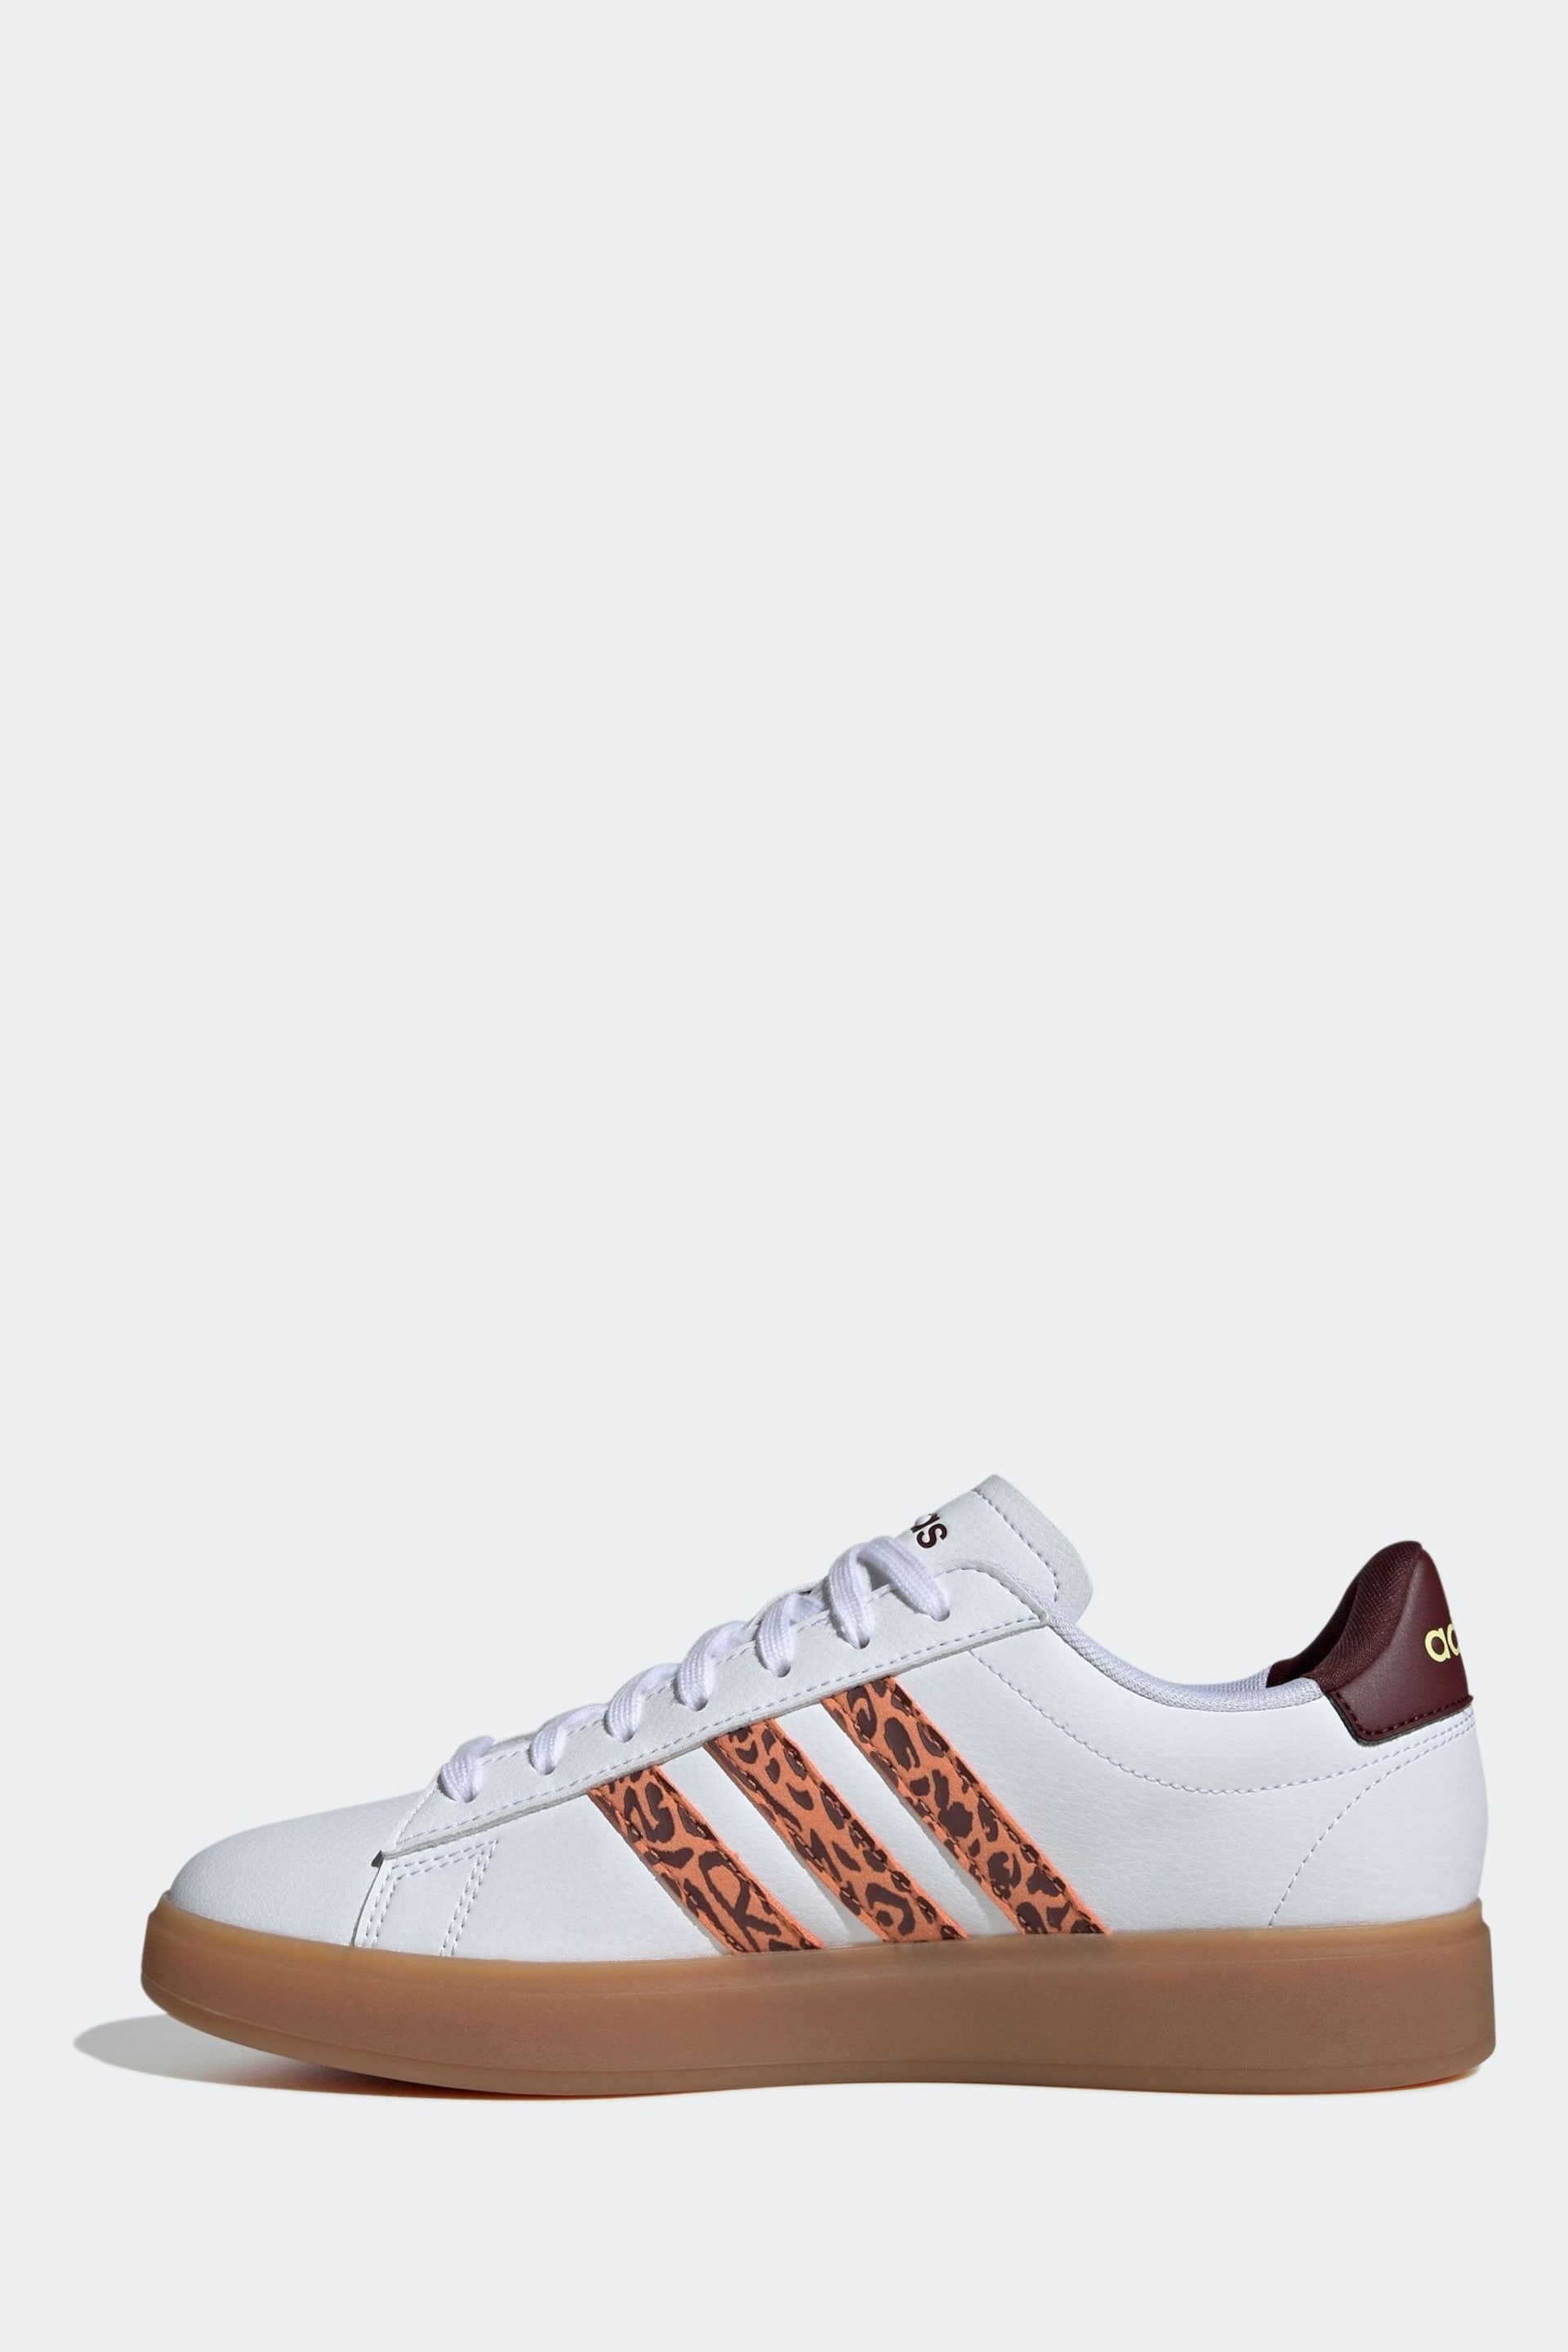 adidas White Grand Court 2.0 Trainers - Image 5 of 12